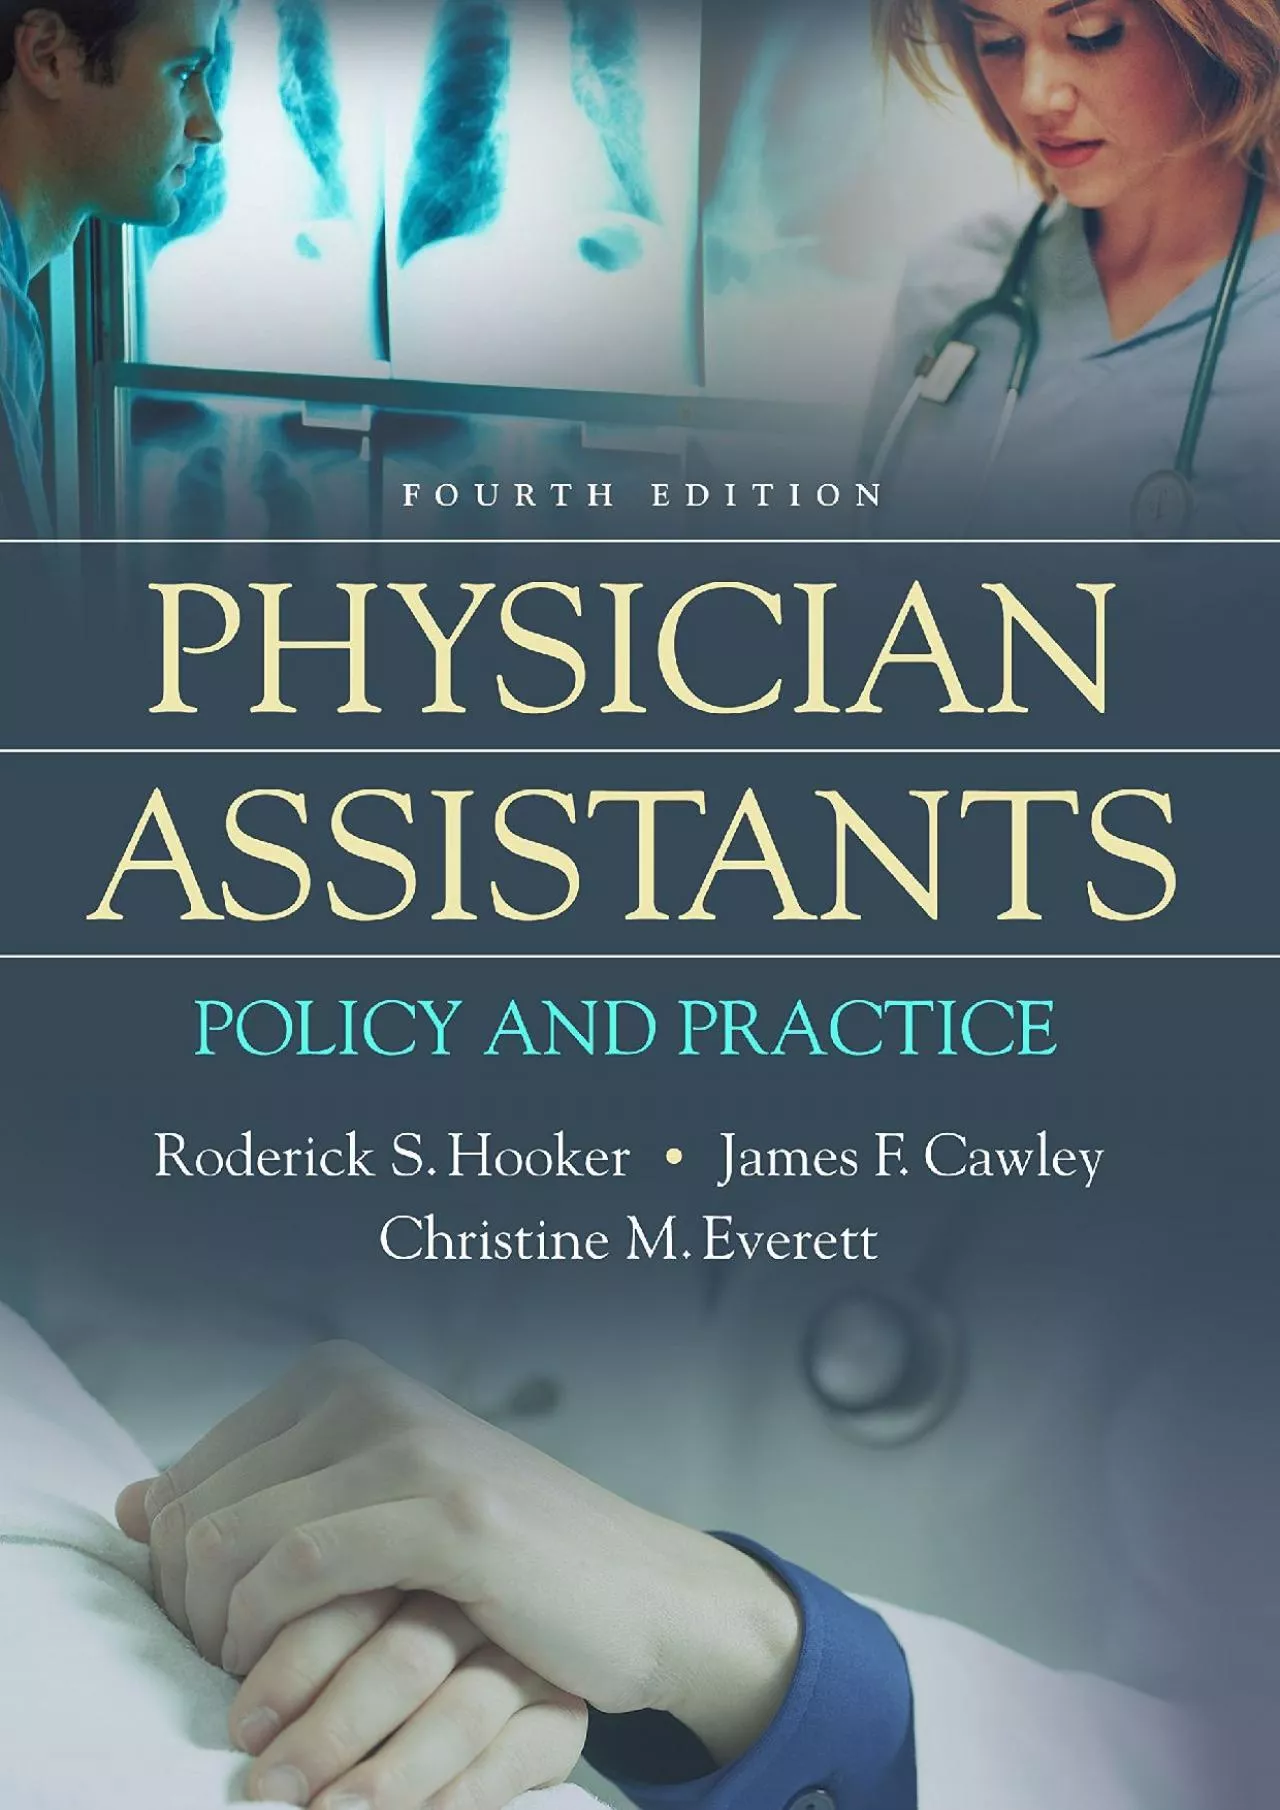 (DOWNLOAD)-Physician Assistants: Policy and Practice